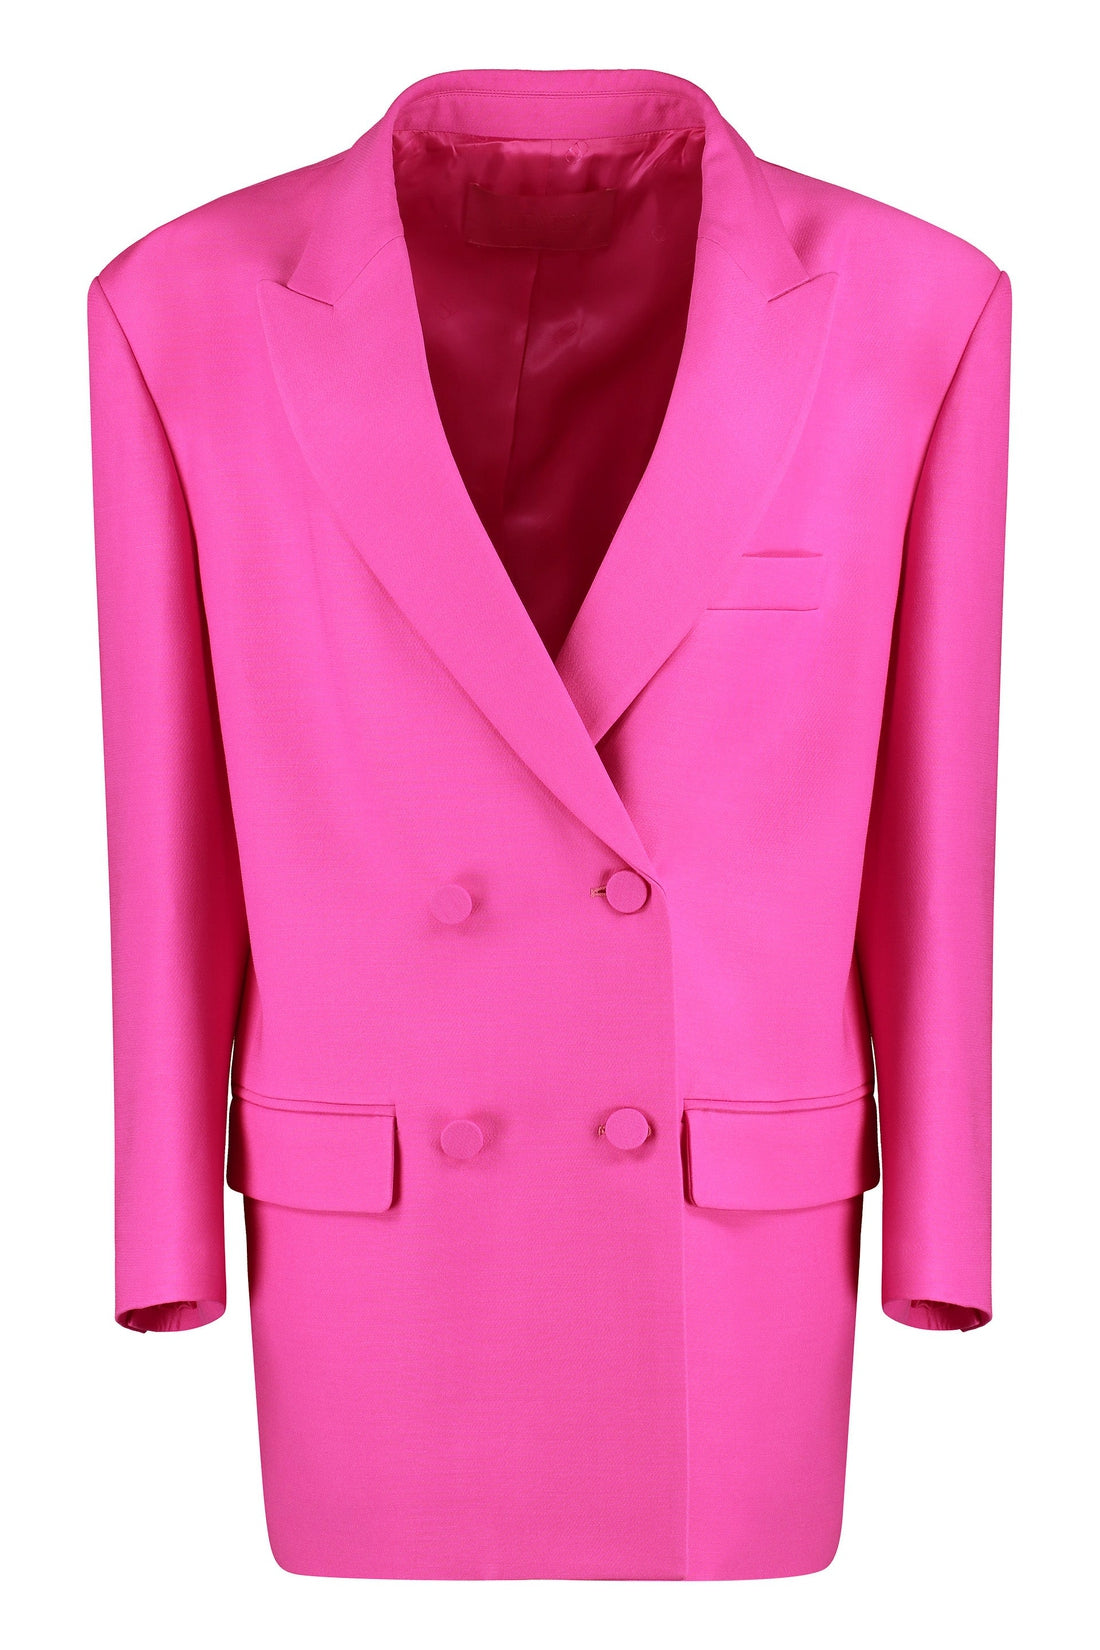 Valentino-OUTLET-SALE-Wool and silk double breasted blazer-ARCHIVIST